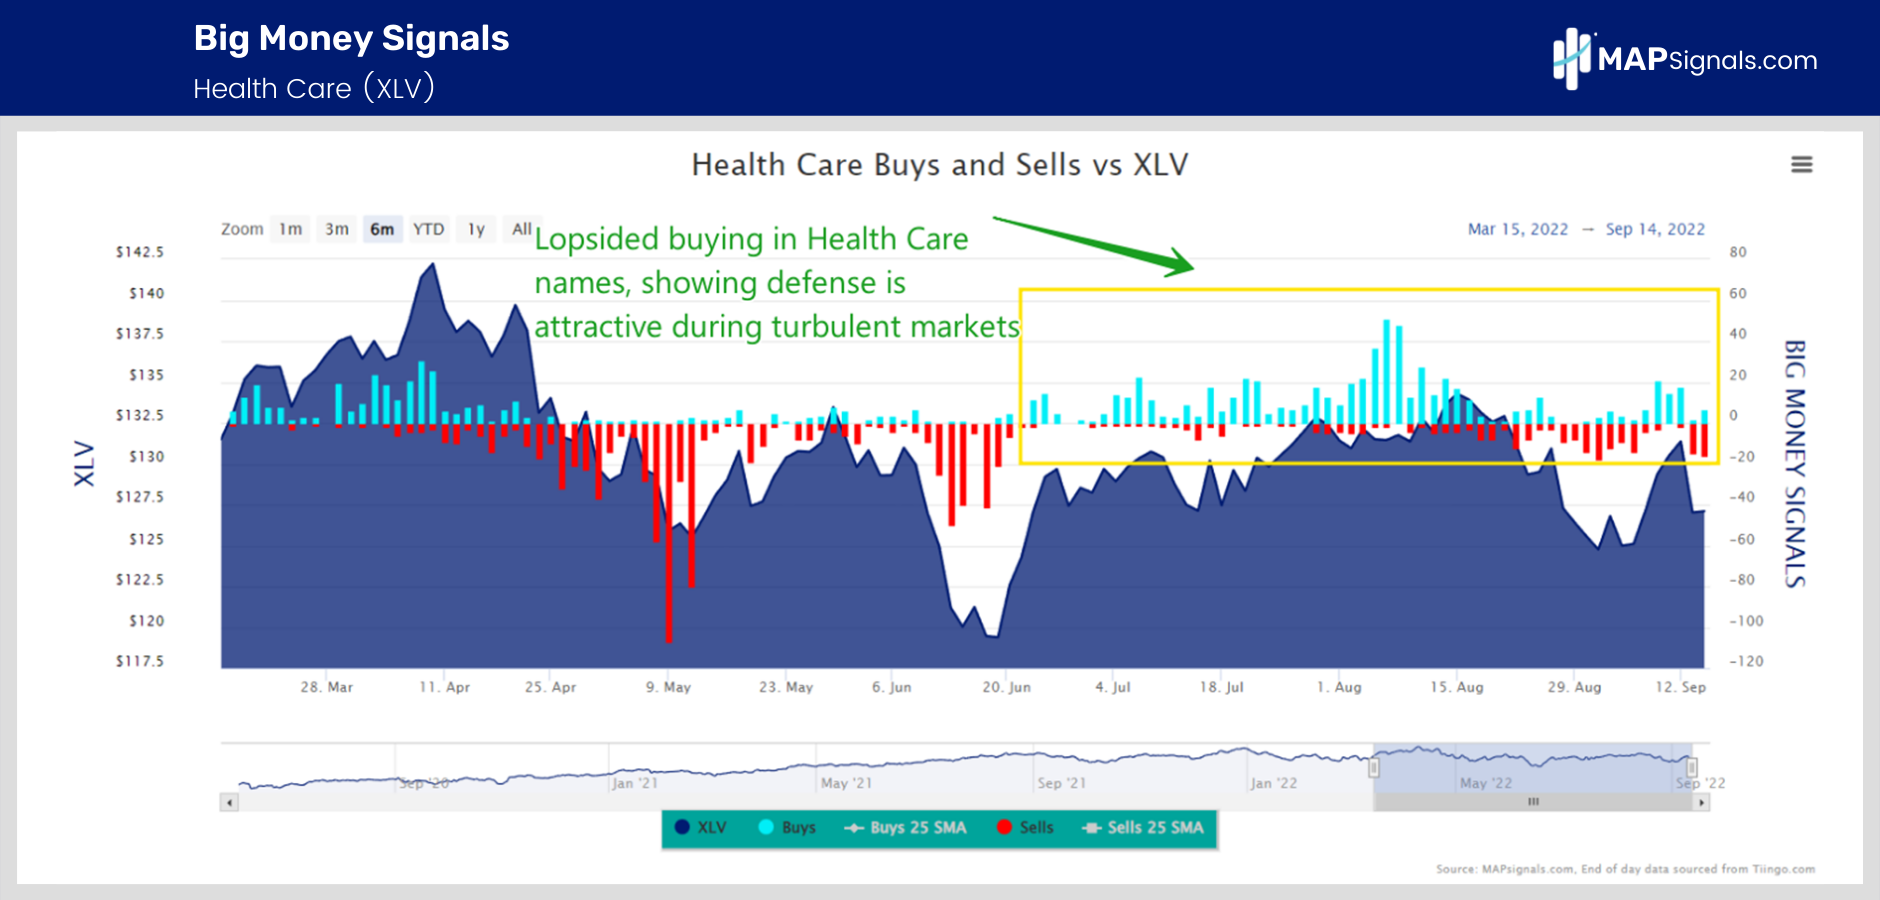 Lopsided buying in Health Care names | Big Money Signals (XLV)